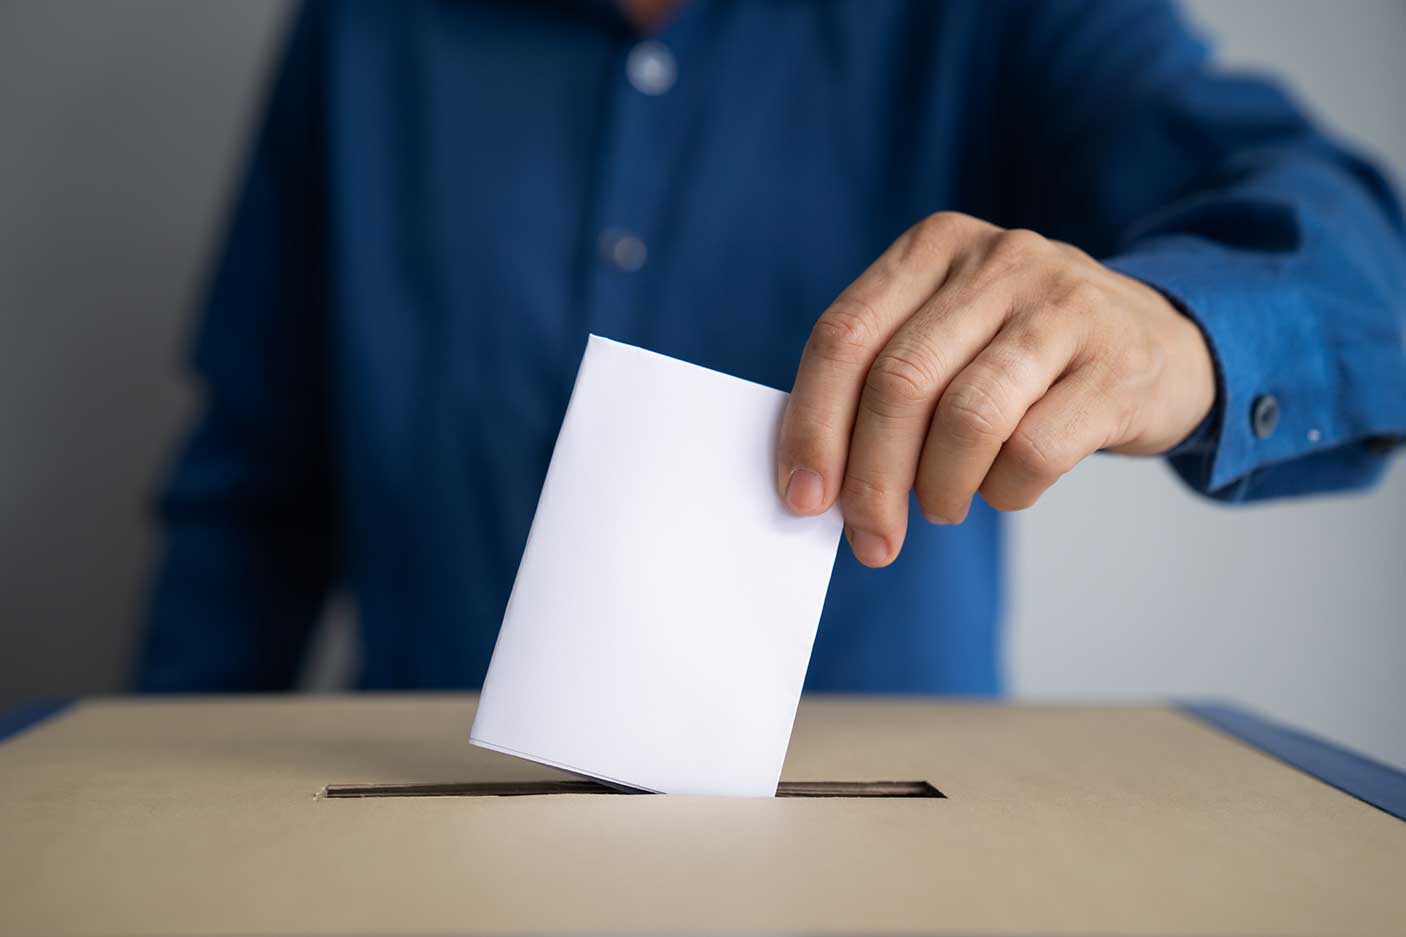 A person casting their vote